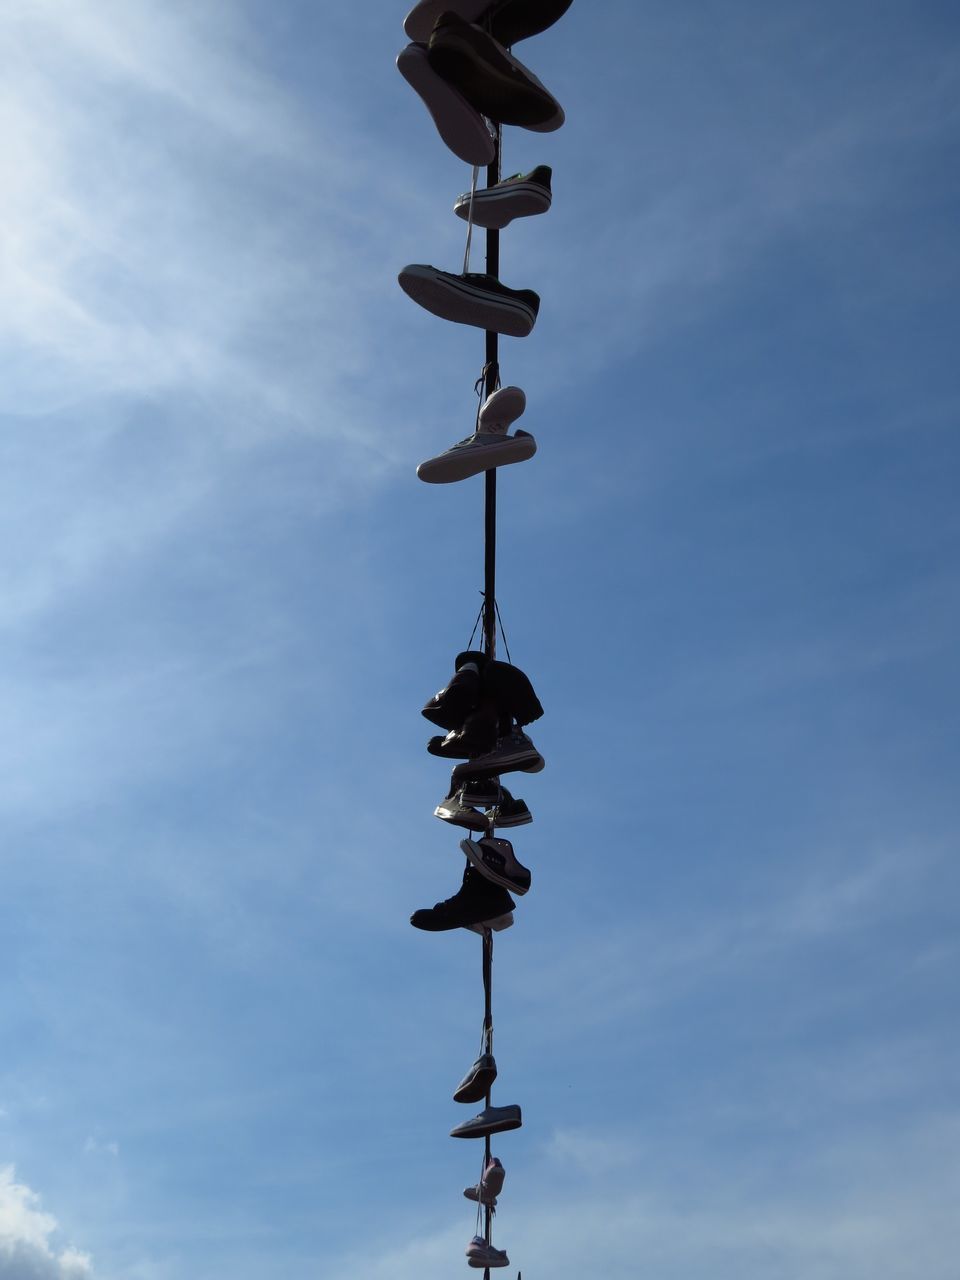 LOW ANGLE VIEW OF WEATHER VANE AGAINST CLOUDY SKY